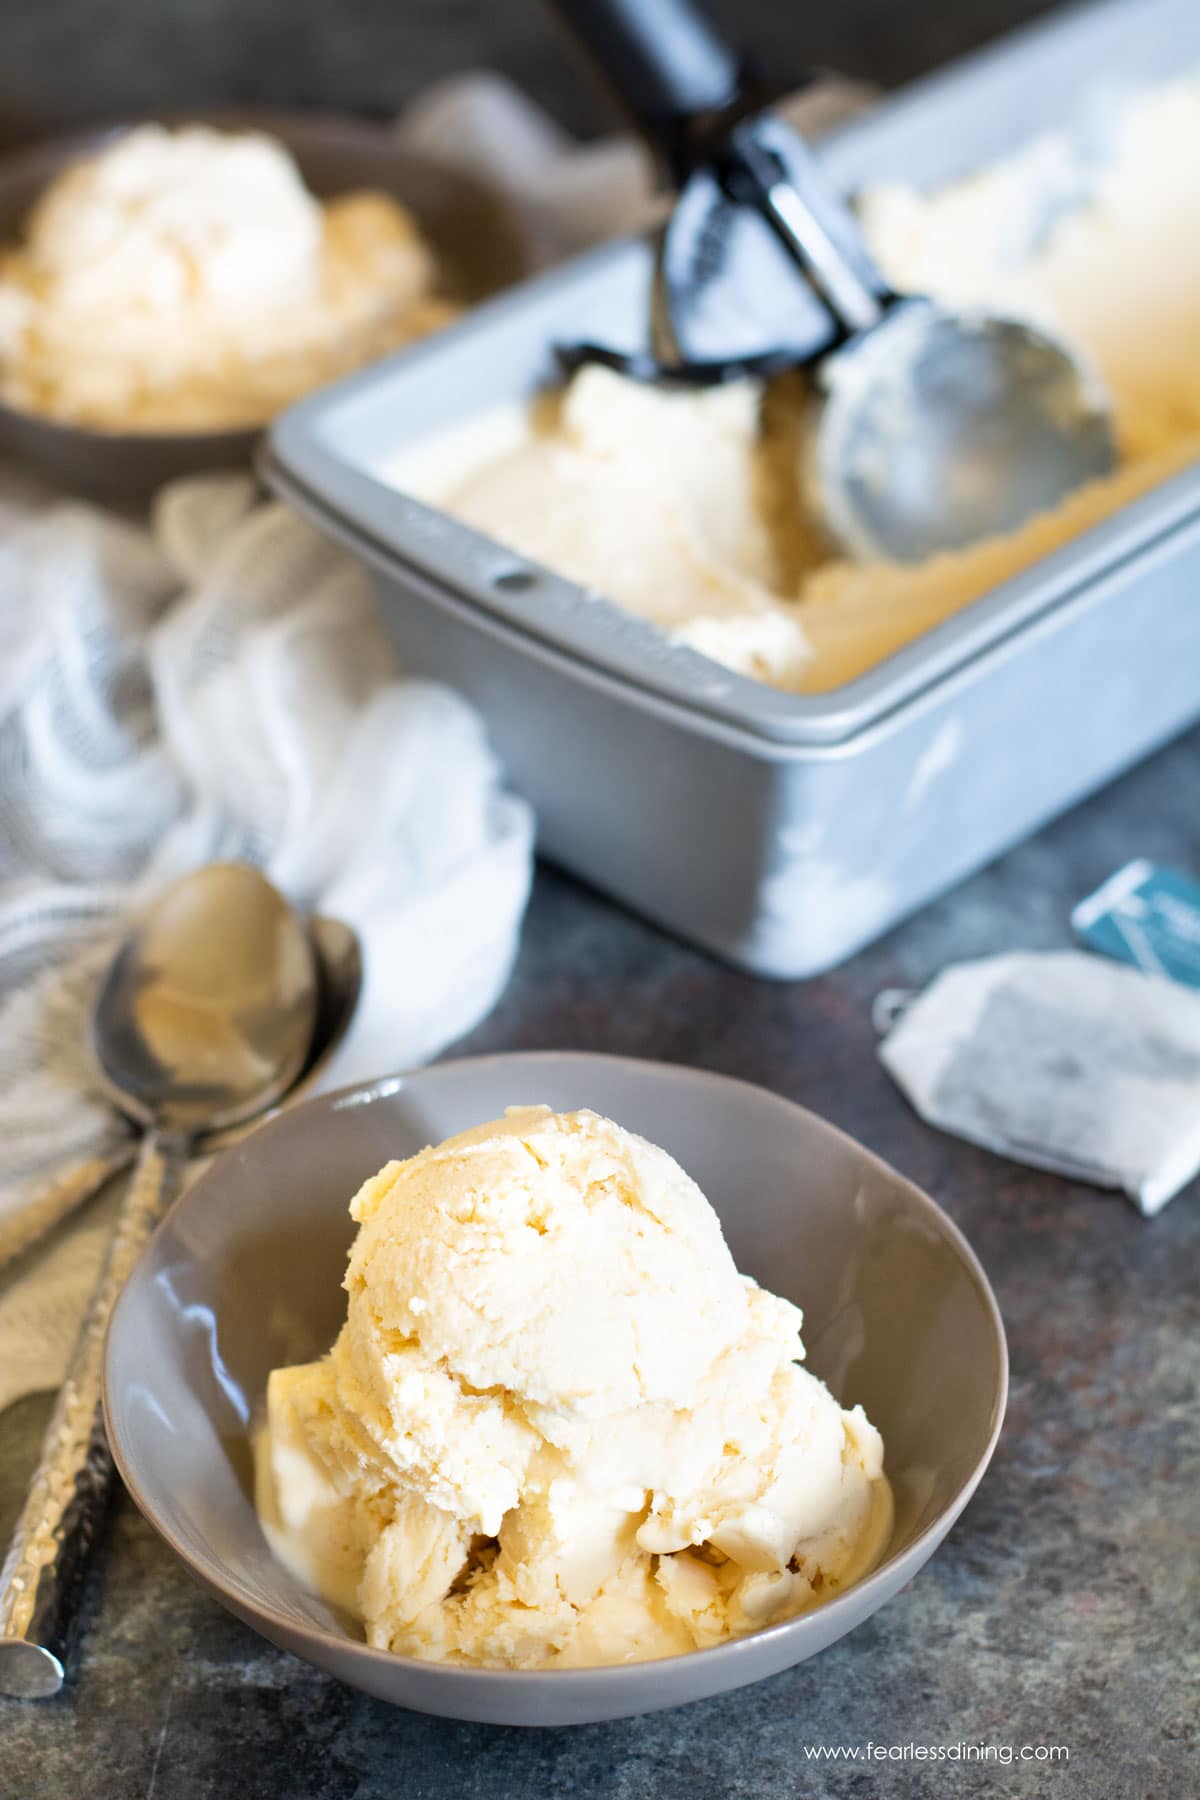 Earl grey ice cream scoops in small grey bowls.